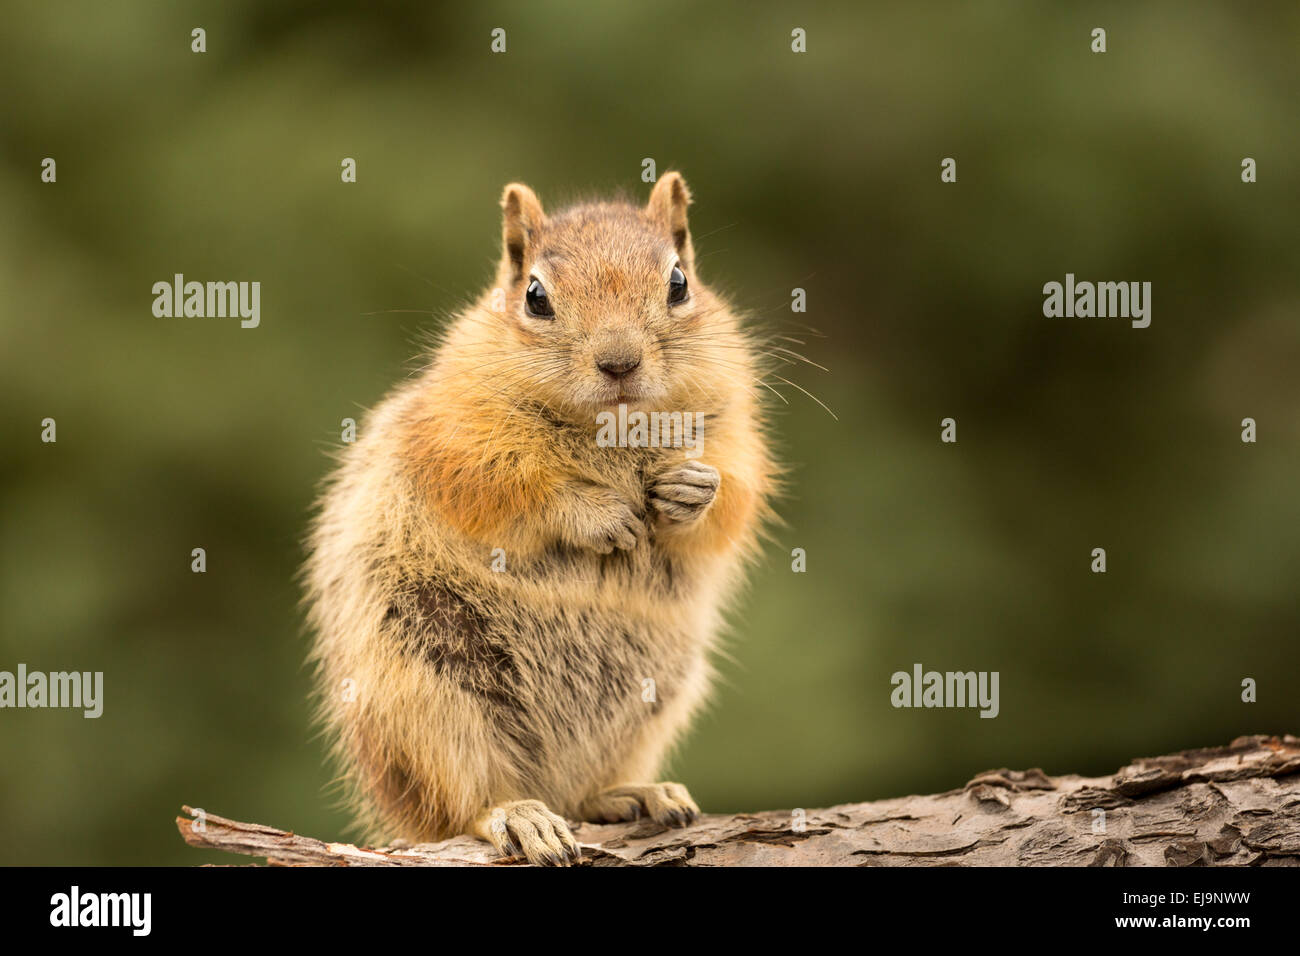 Cute Chipmunk well fed on nuts and seeds Stock Photo